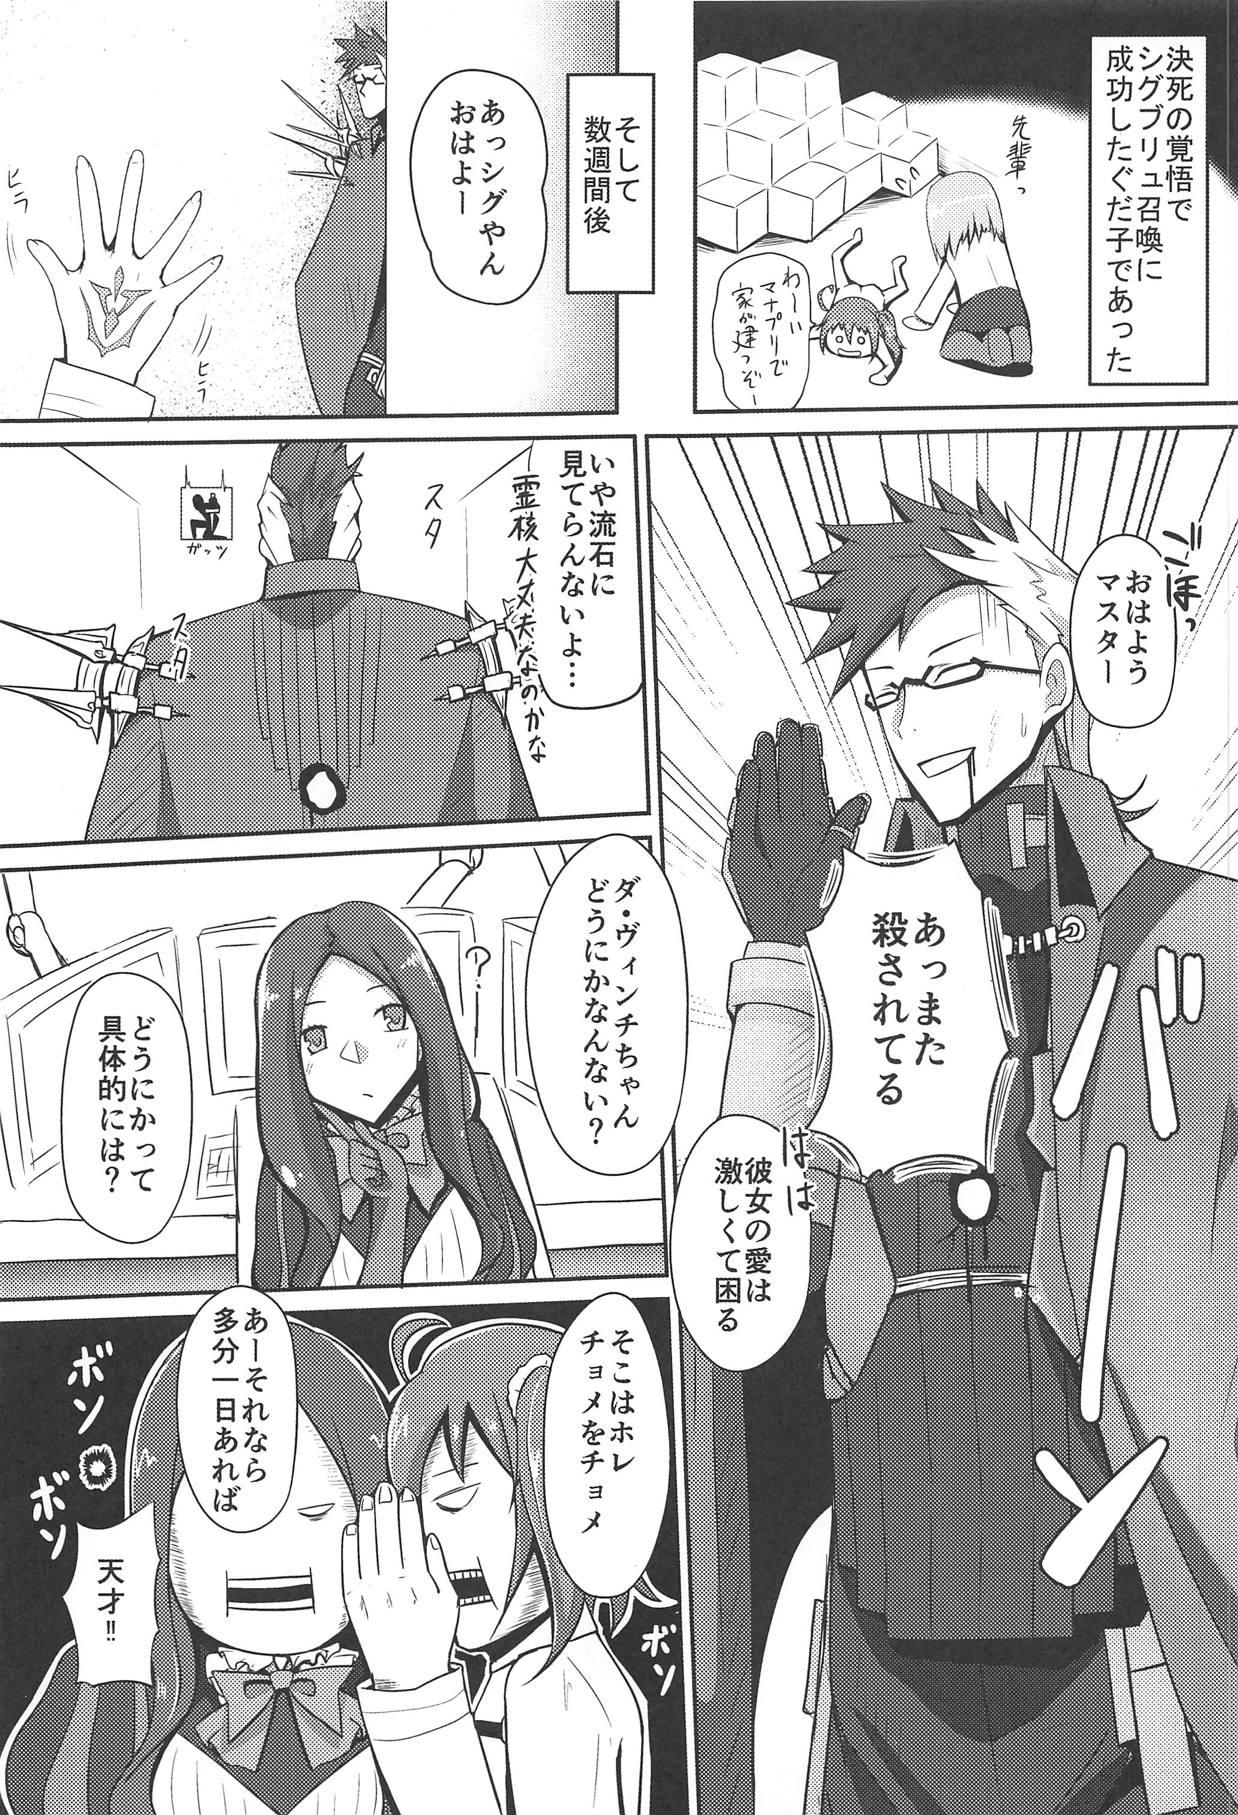 Spy Cam Hatsujou Sen Otome - Fate grand order Gay Trimmed - Page 2